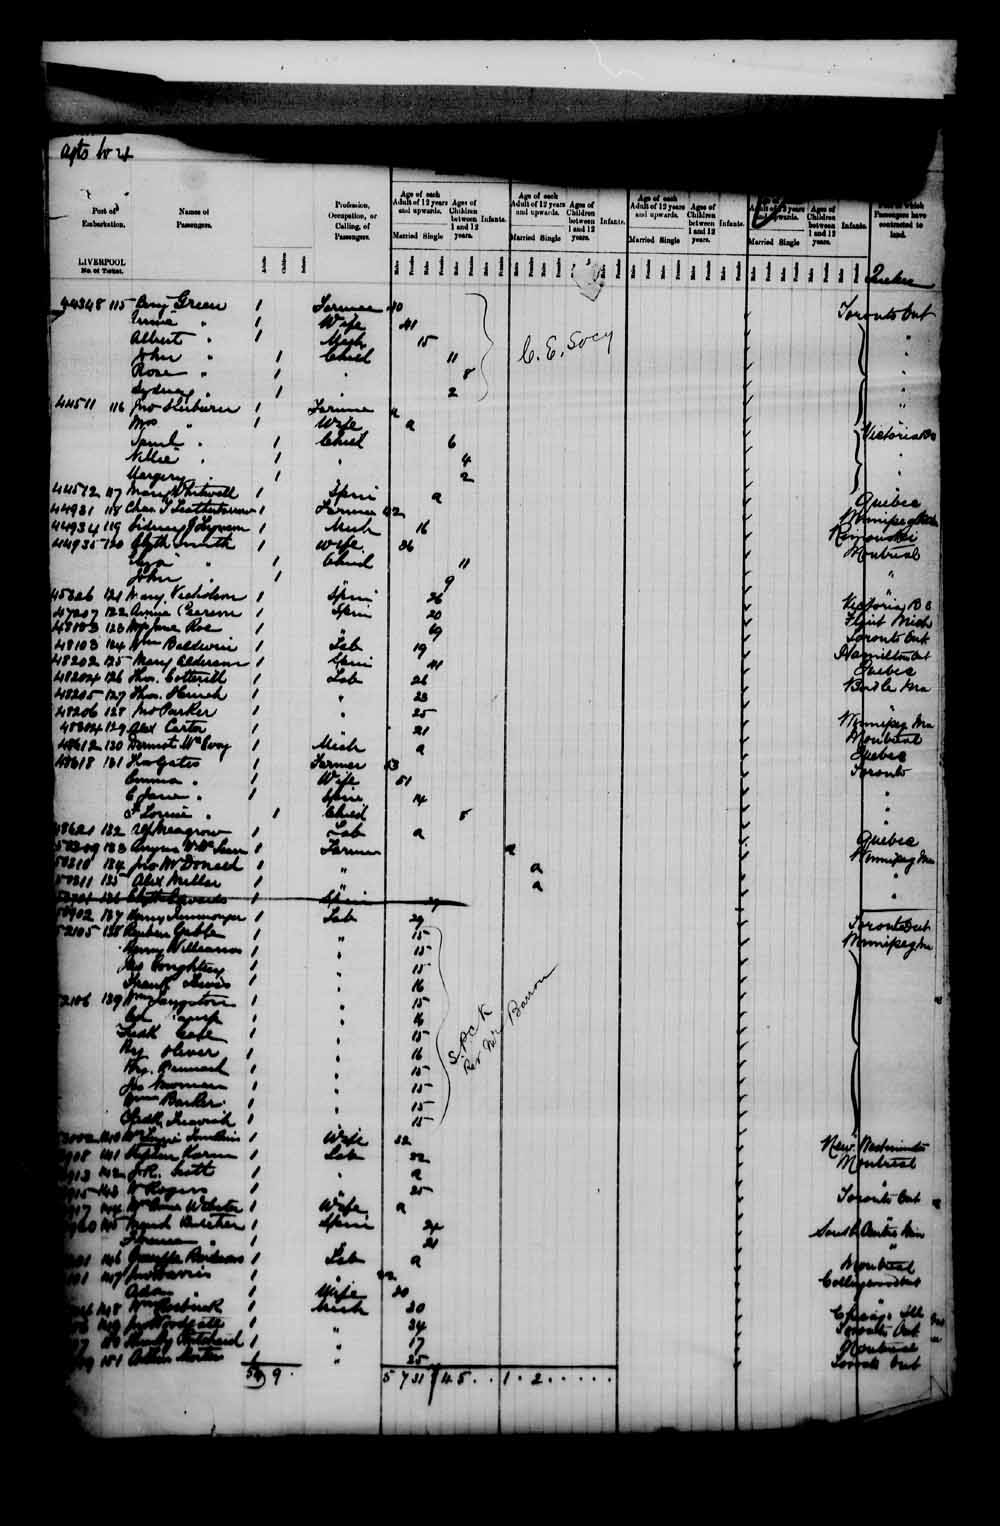 Digitized page of Passenger Lists for Image No.: e003549673